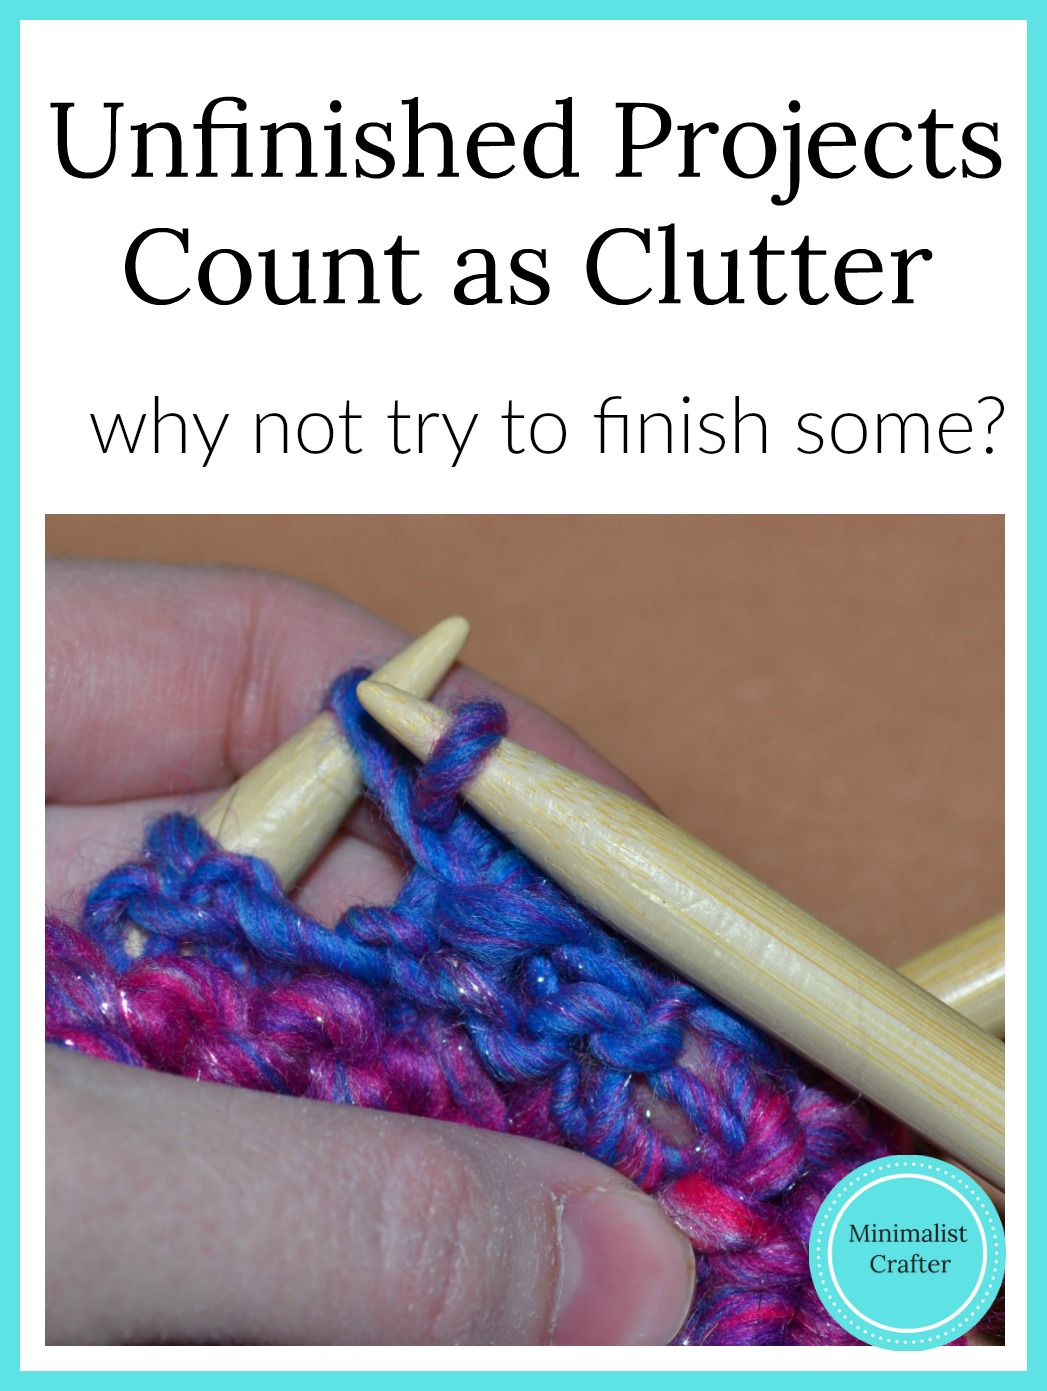 Why it's important to finish lingering craft projects